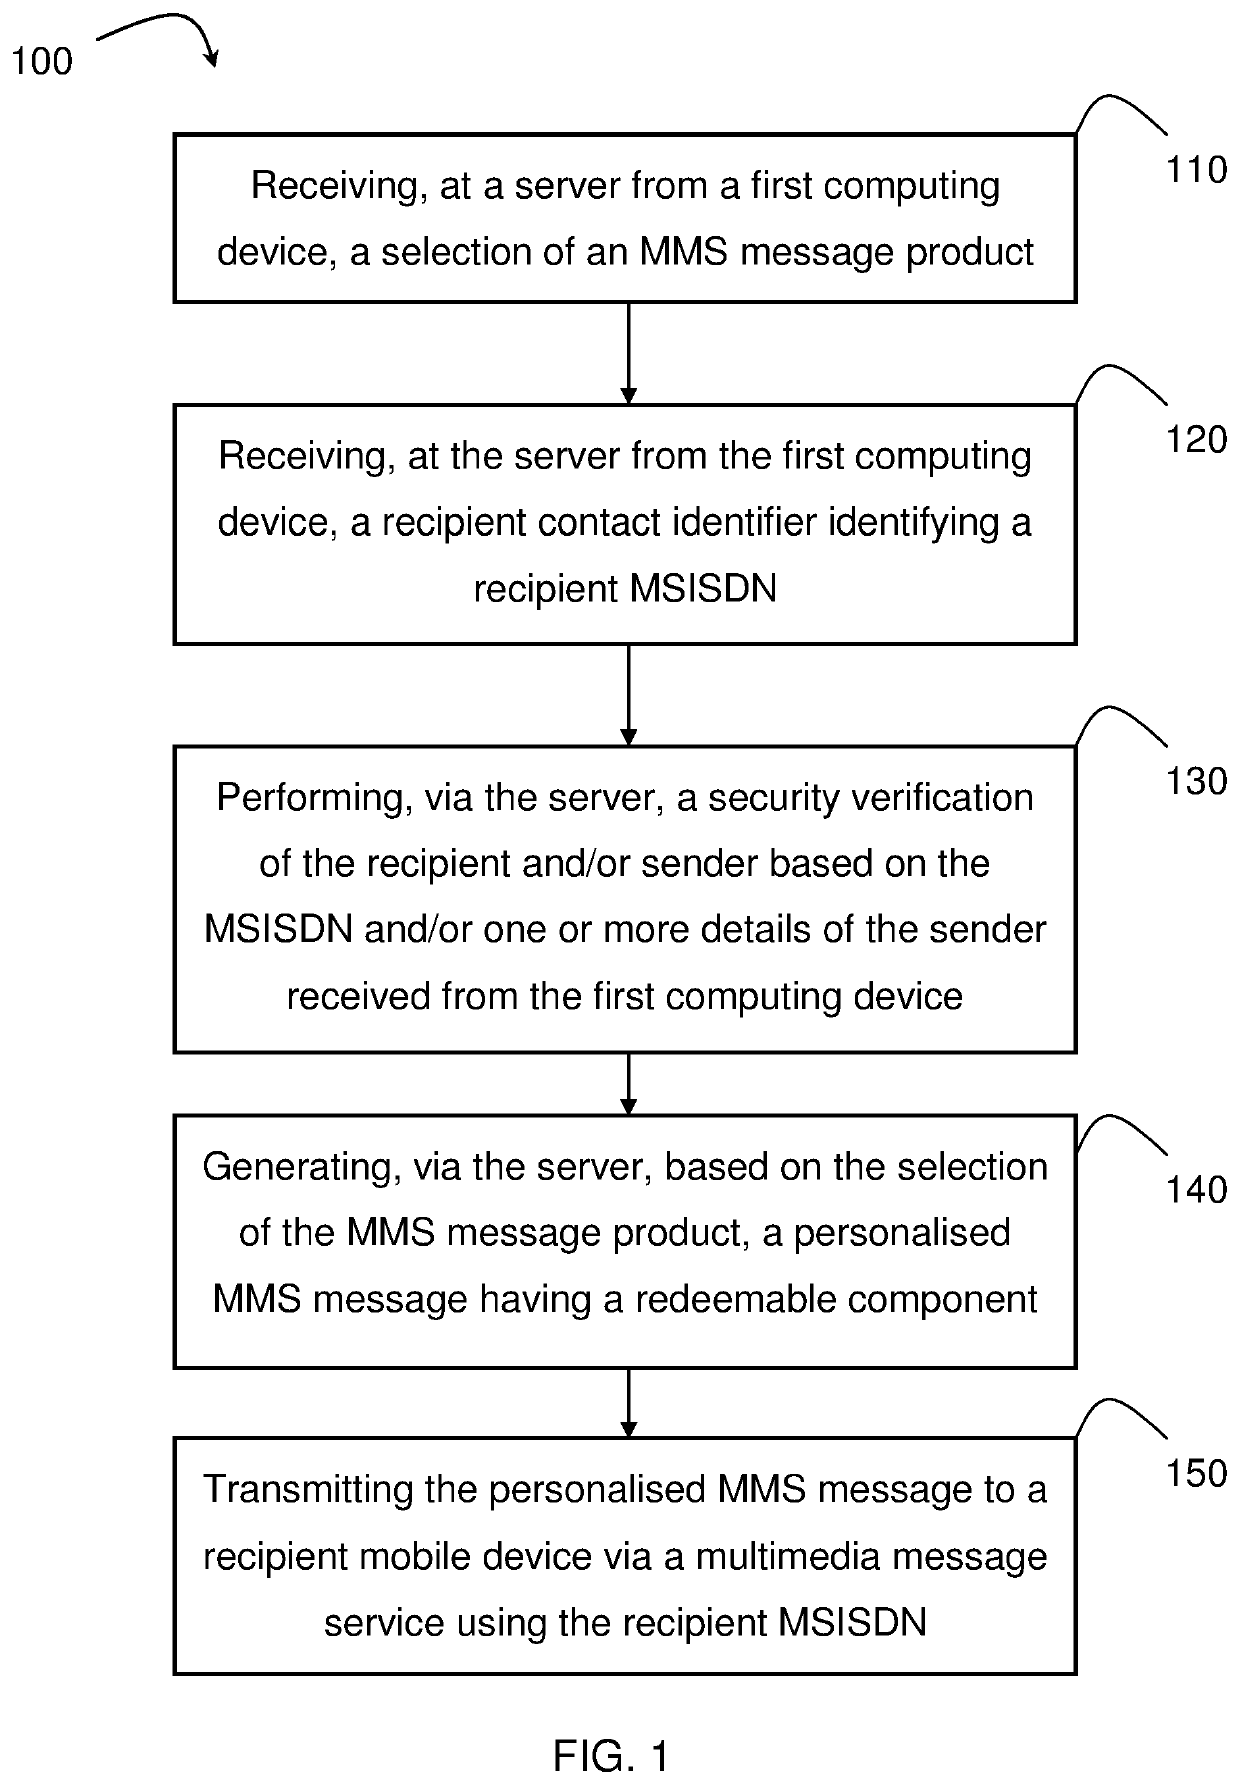 System and method for generating a  personalised mms messsage having a redeemable component